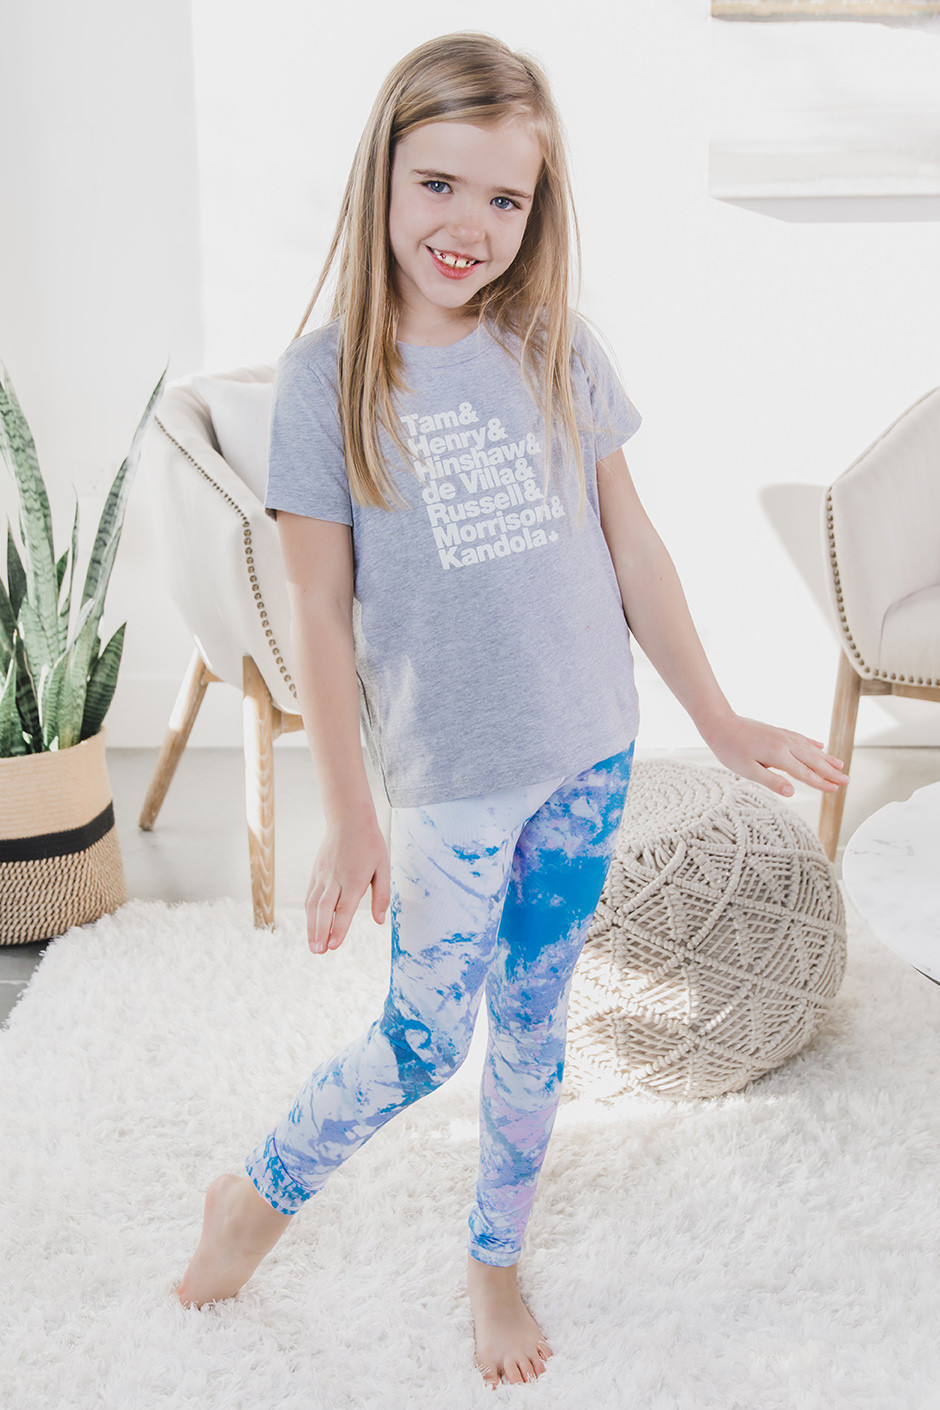 Harmony and Balance Blue & White Tie-Dye leggings Small Size S